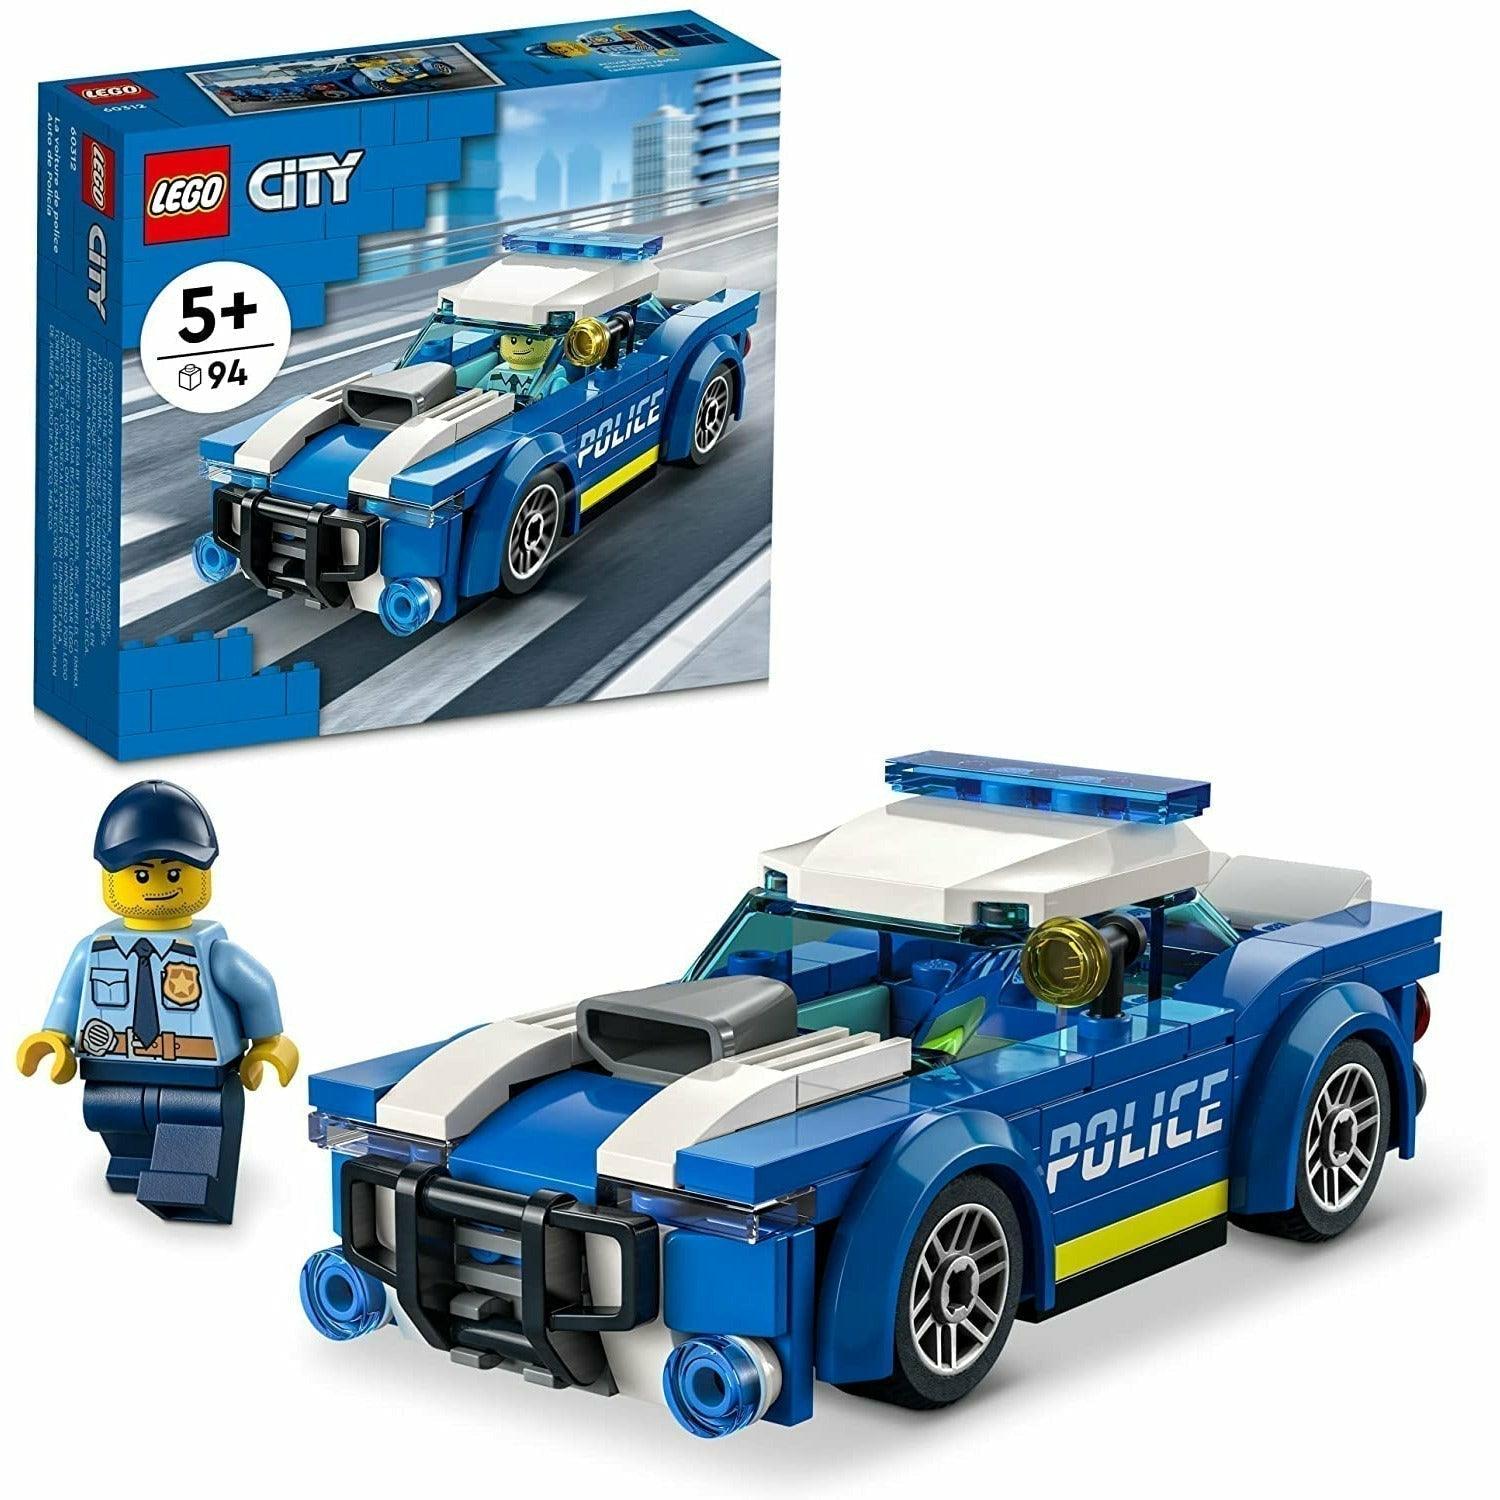 LEGO City Police Car 60312 Building Kit Includes a Police Officer Minifigure with a Toy Flashlight and a Police Cap (94 Pieces) - BumbleToys - 4+ Years, 5-7 Years, 6+ Years, Boys, Cars, City, EXO, LEGO, Pre-Order